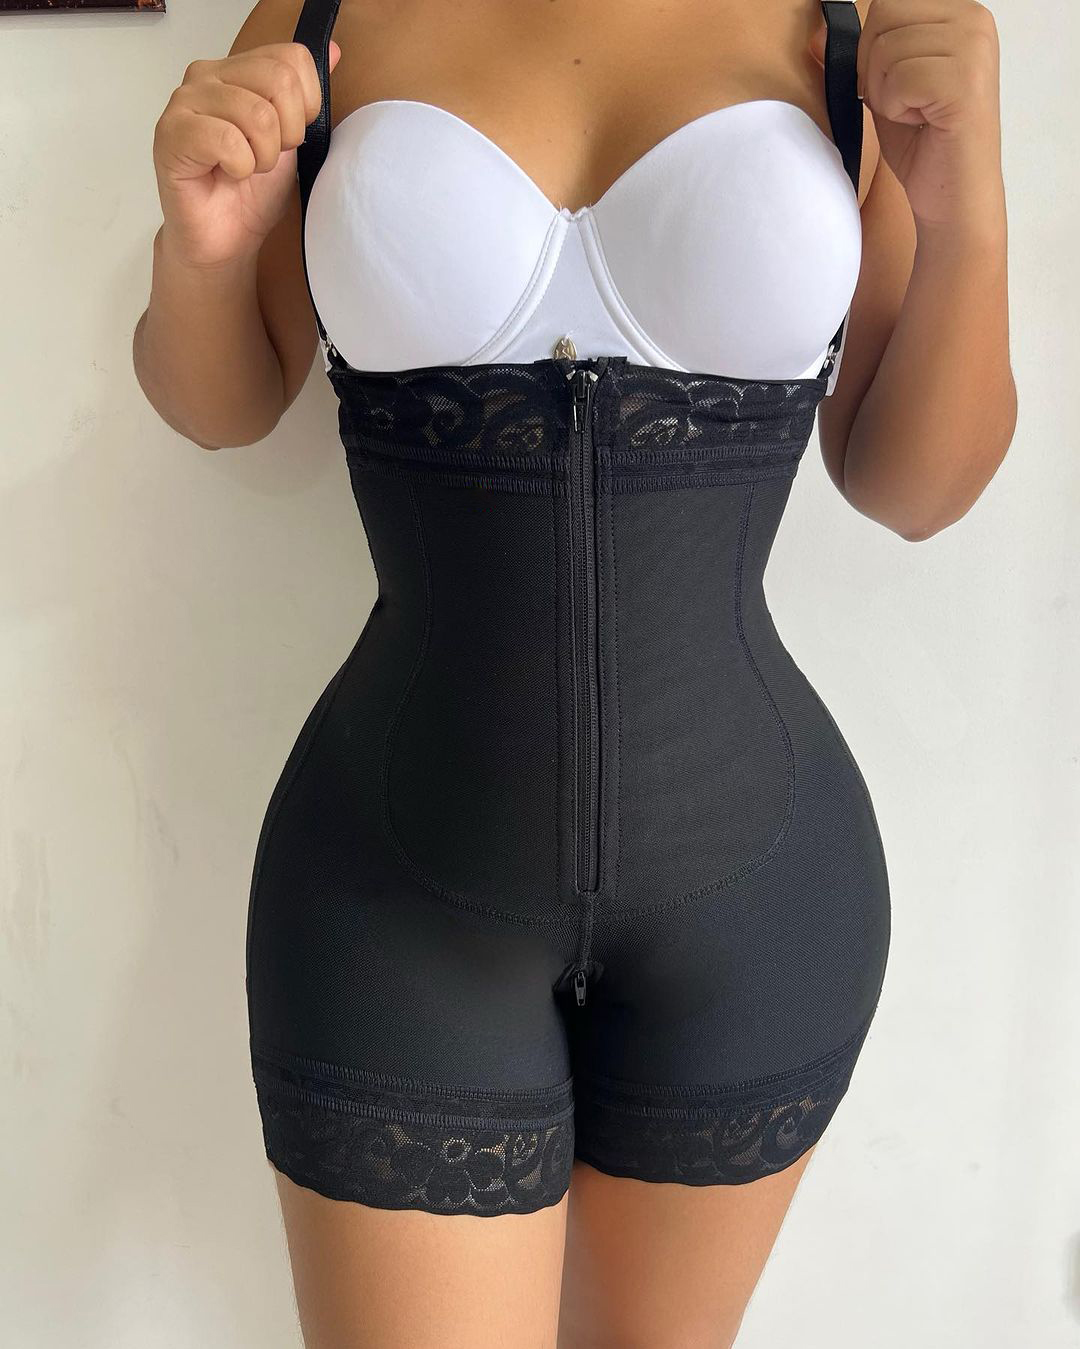 Hourglass Girdle with Defined Curves Strapless with Closure and Snaps